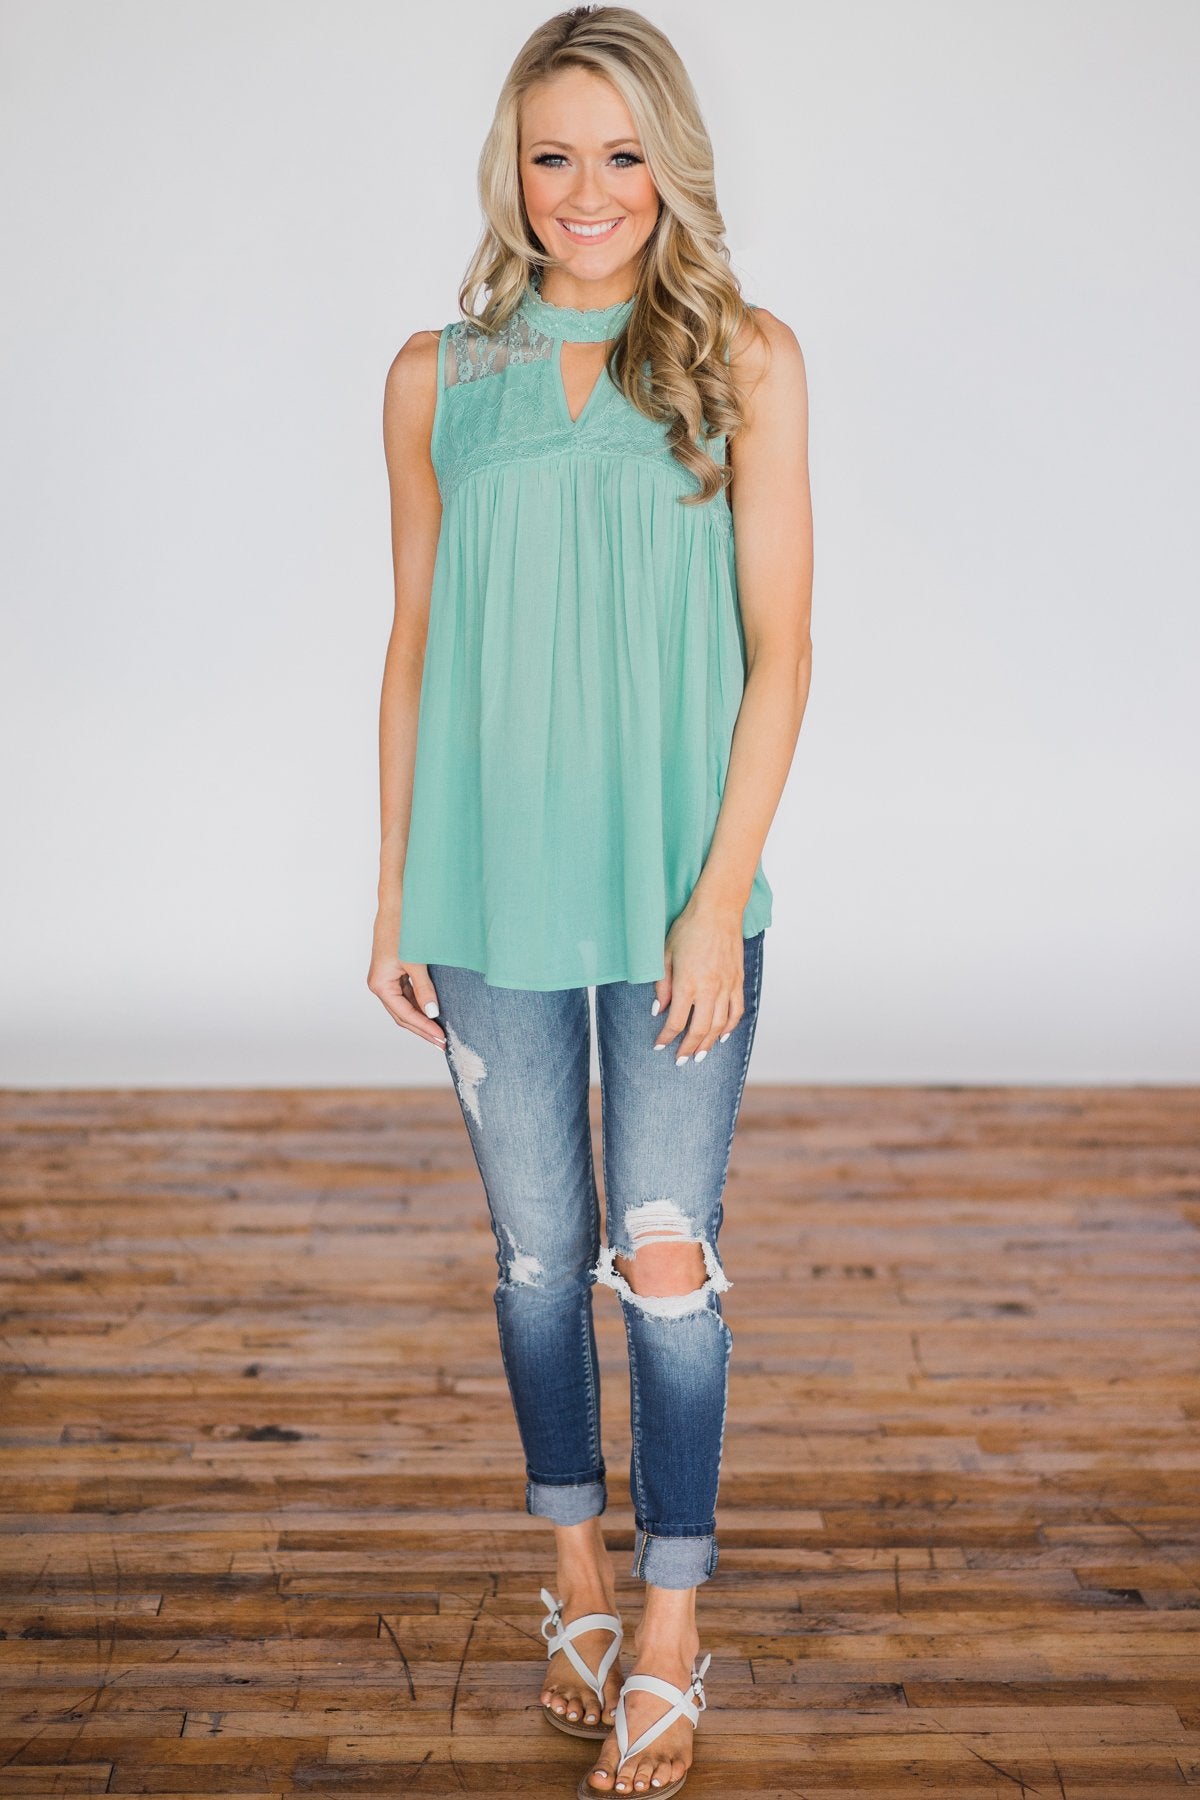 Like I Loved You Lace Tank Top- Bright Mint